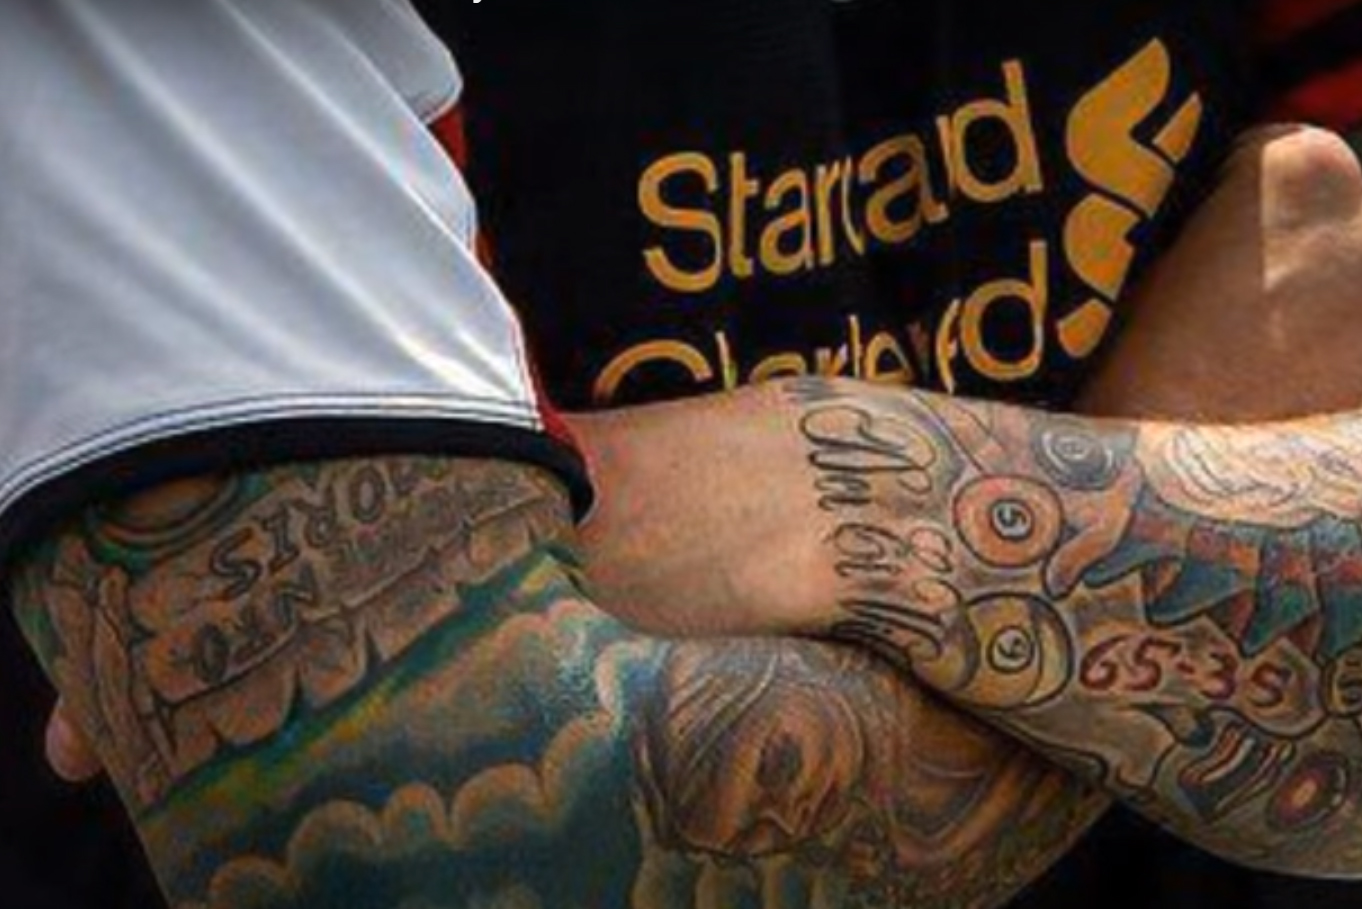 Cultural and fashion aspects of tattoos in sports